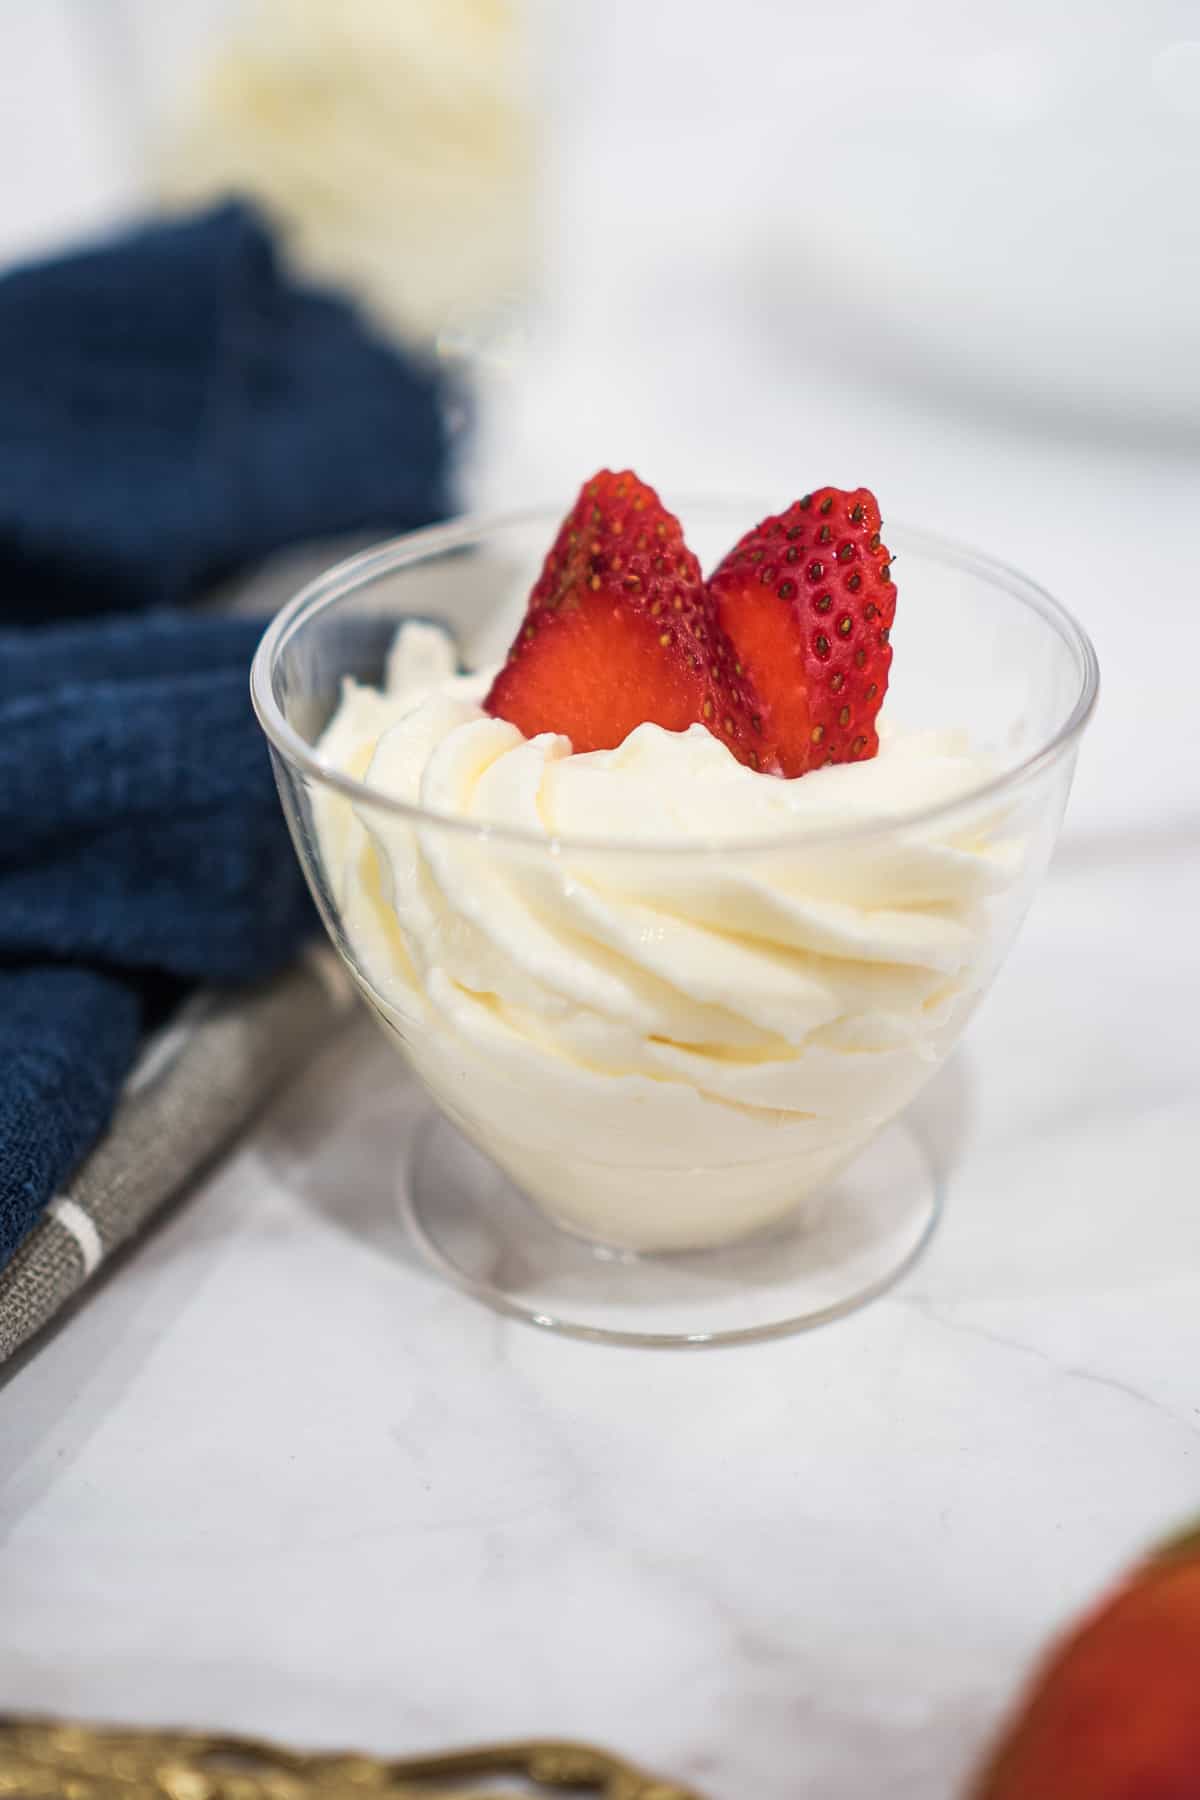 Mascarpone whipped cream frosting piped into a glass and decorated with strawberry slices.